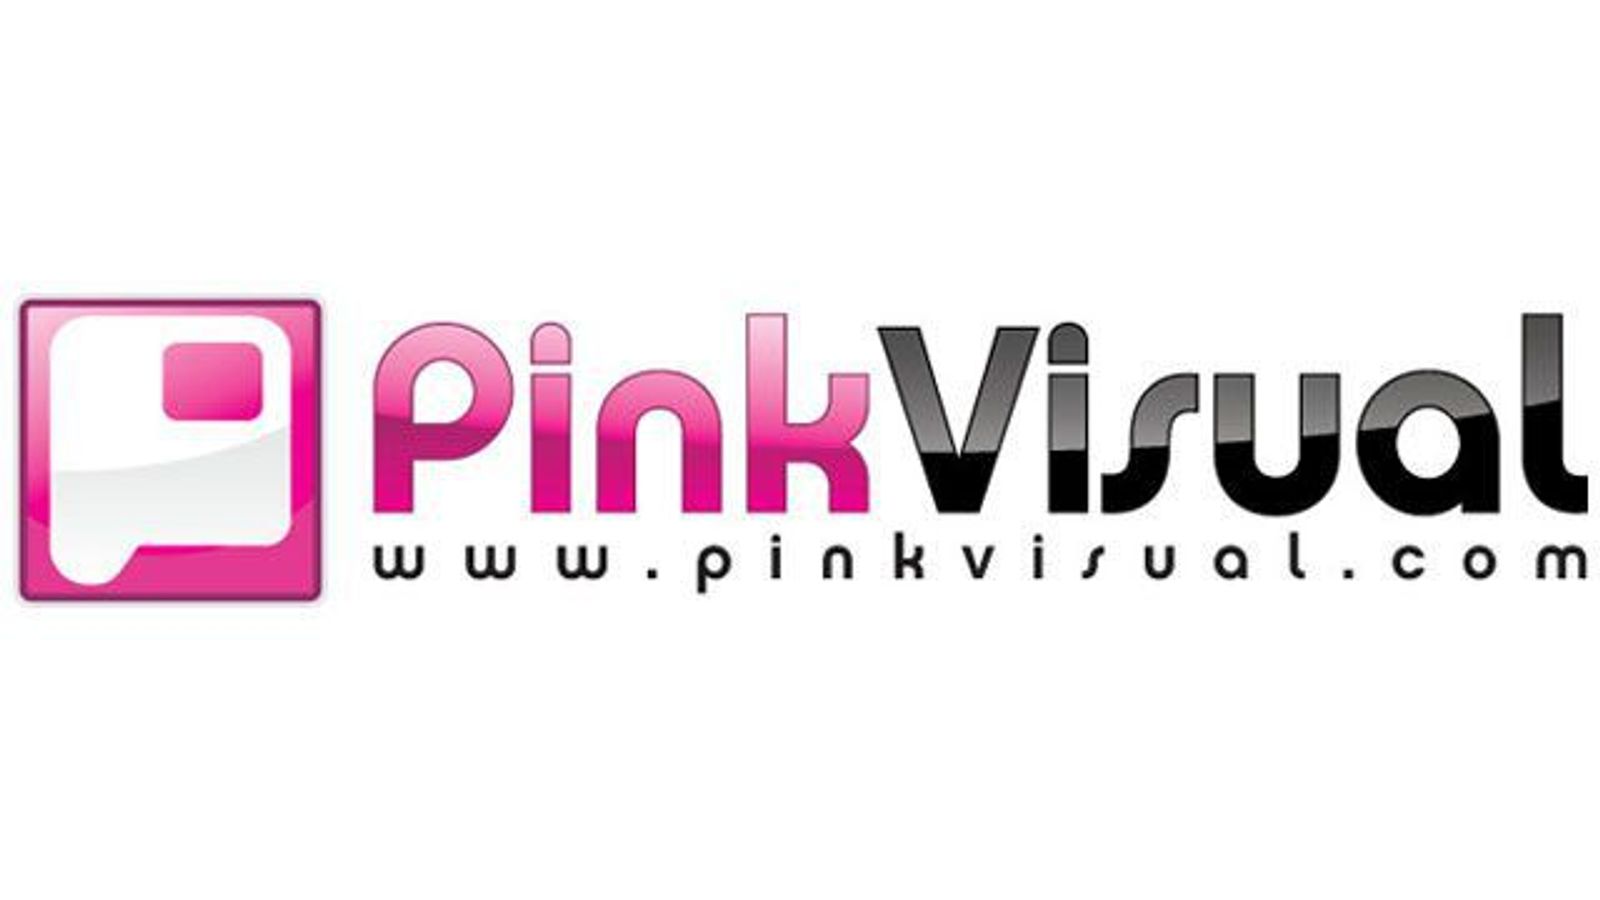 Pink Visual, Jincey Lumpkin, Michelle Lust Partner for New Line